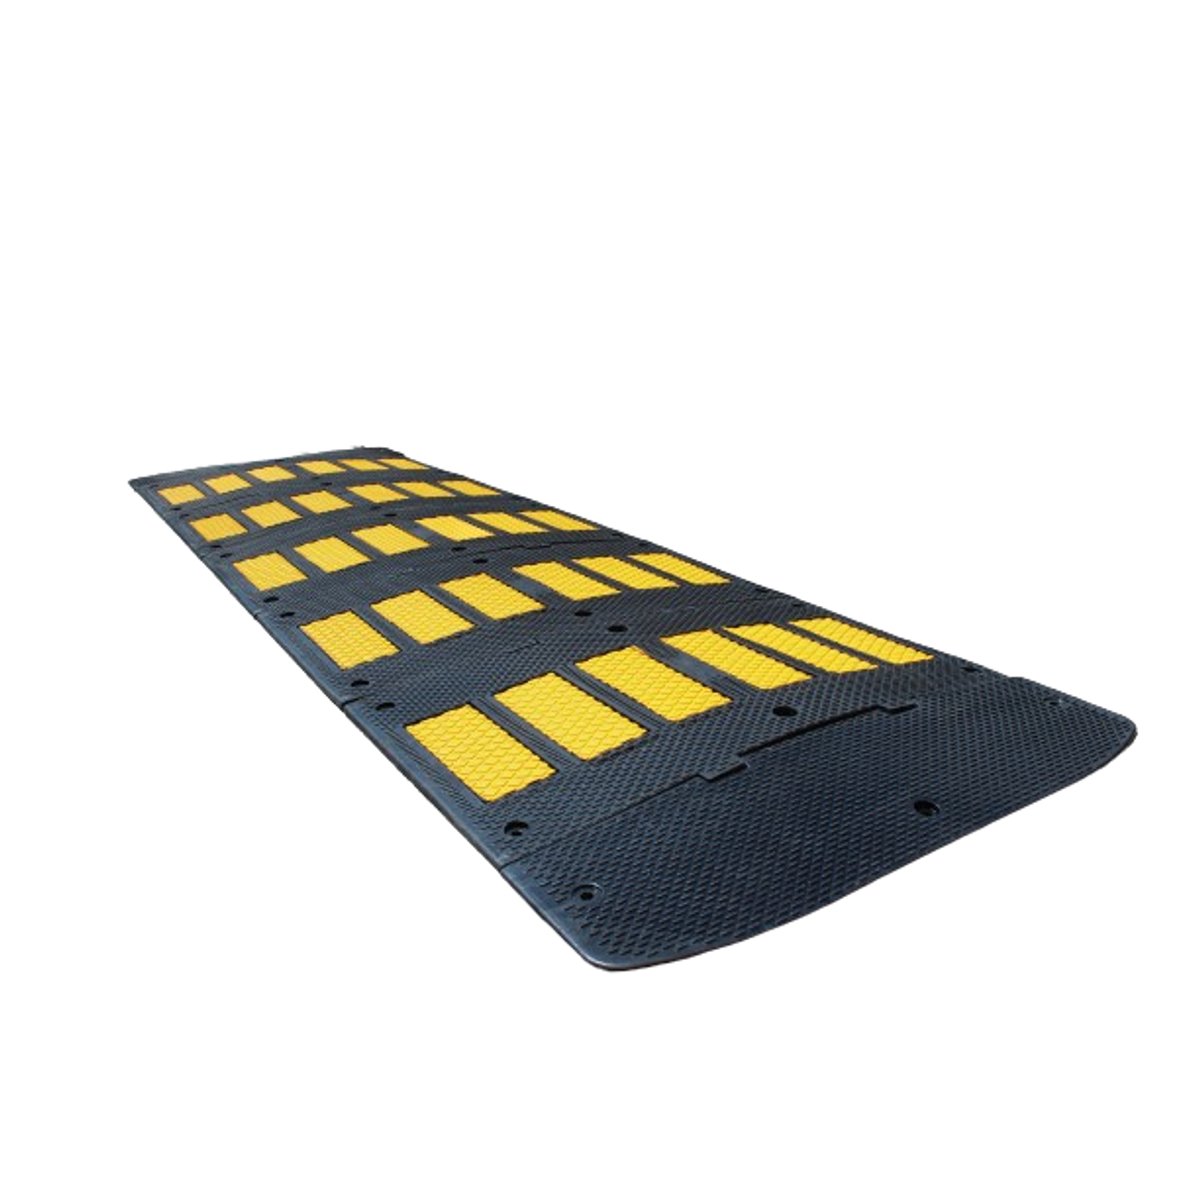 Buy Speed Cushion 50mm Traffic Calming in Speed Humps from Astrolift NZ